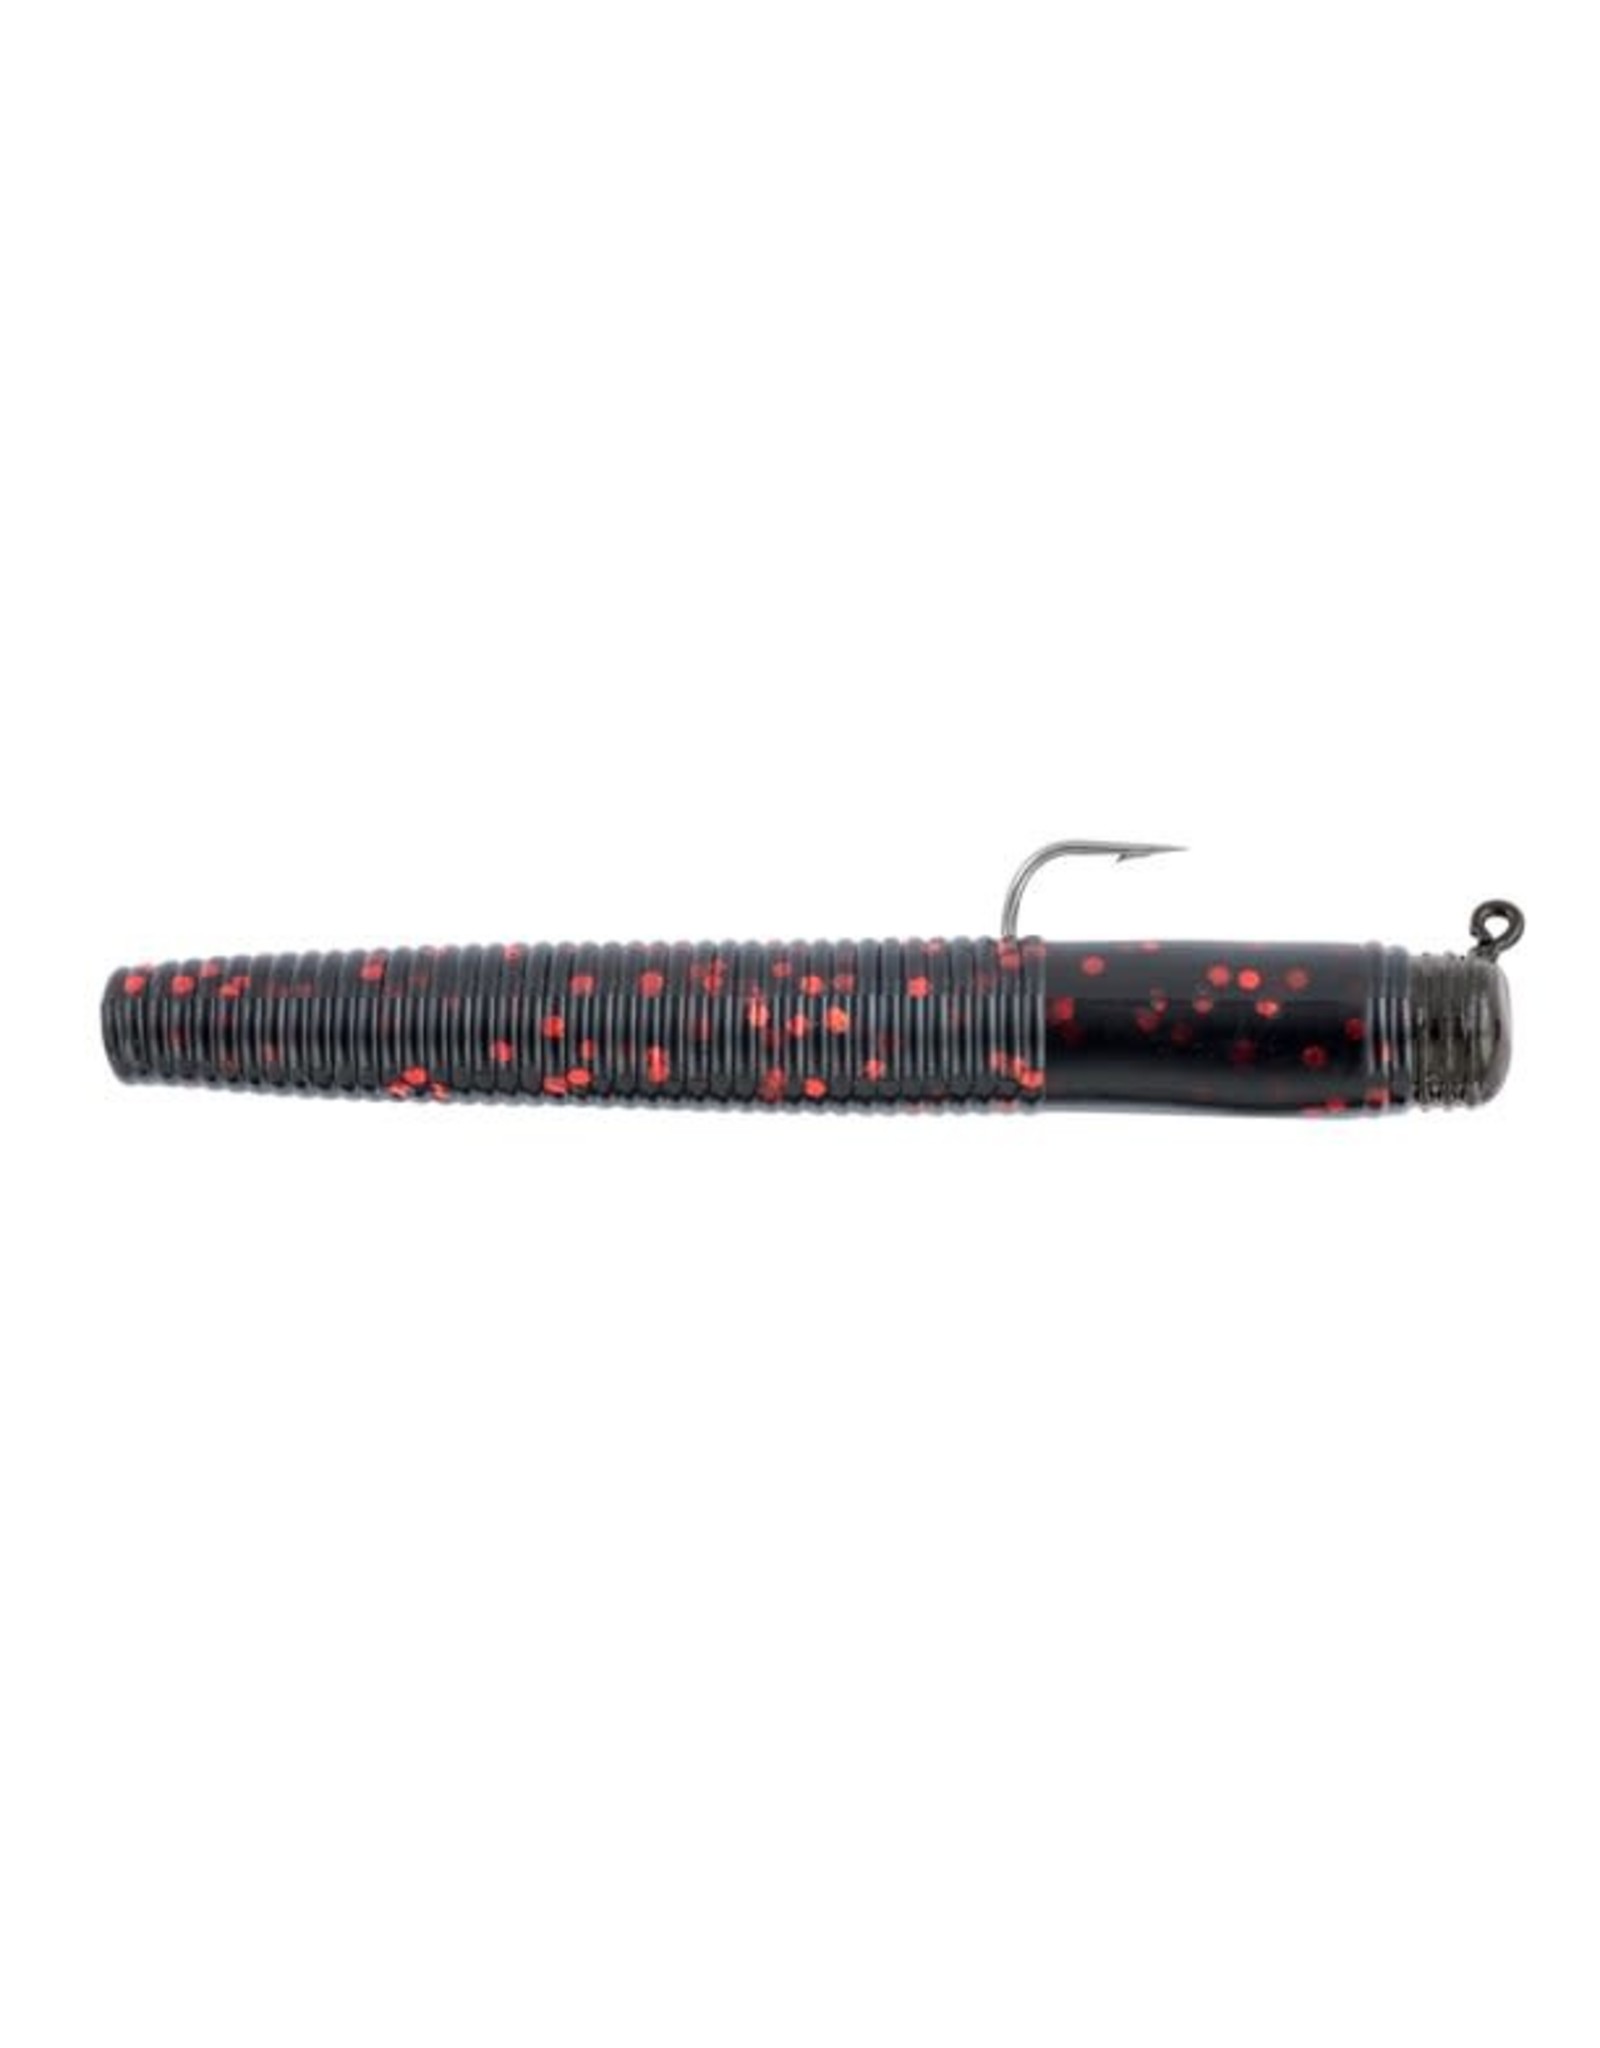 MATZUO Matzuo Pre-Rigged Ned Style -Black/Red - 5 per pack